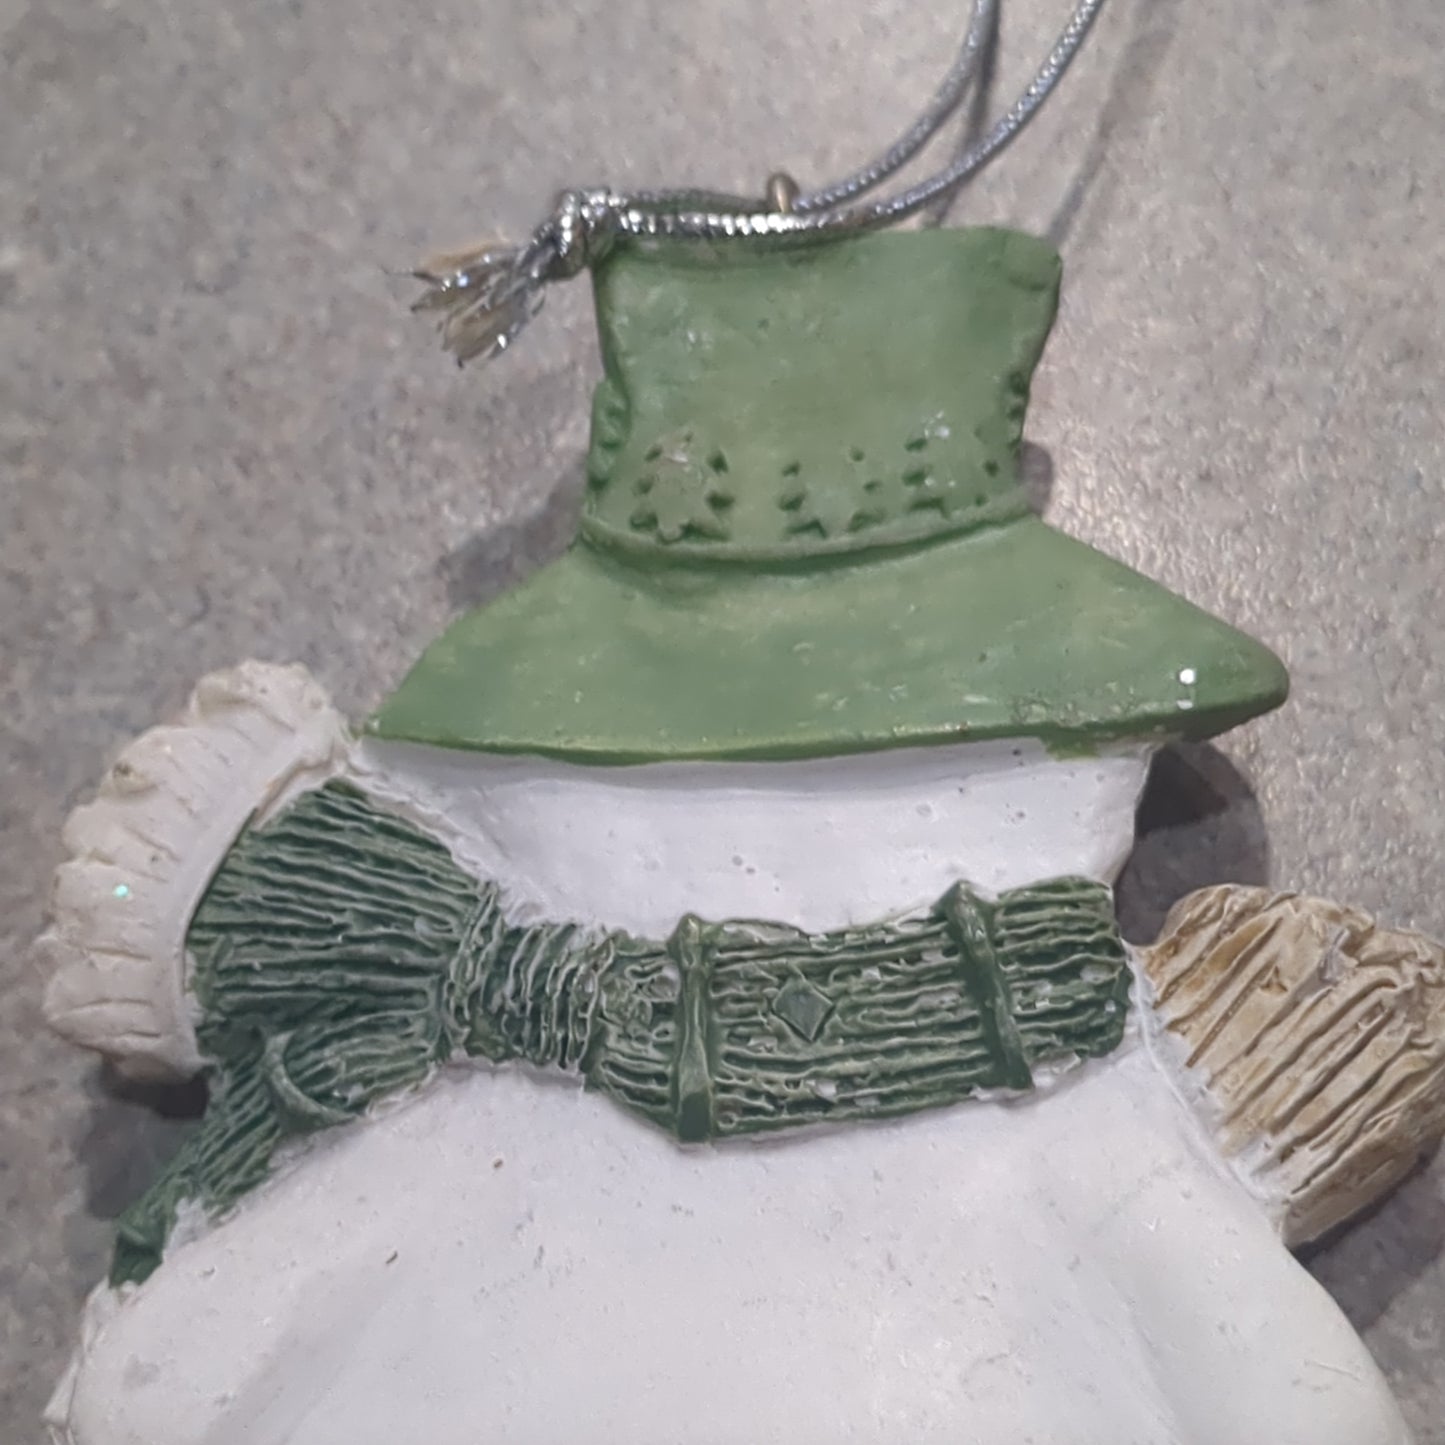 Polycrylic snowman ornament with a broom - green